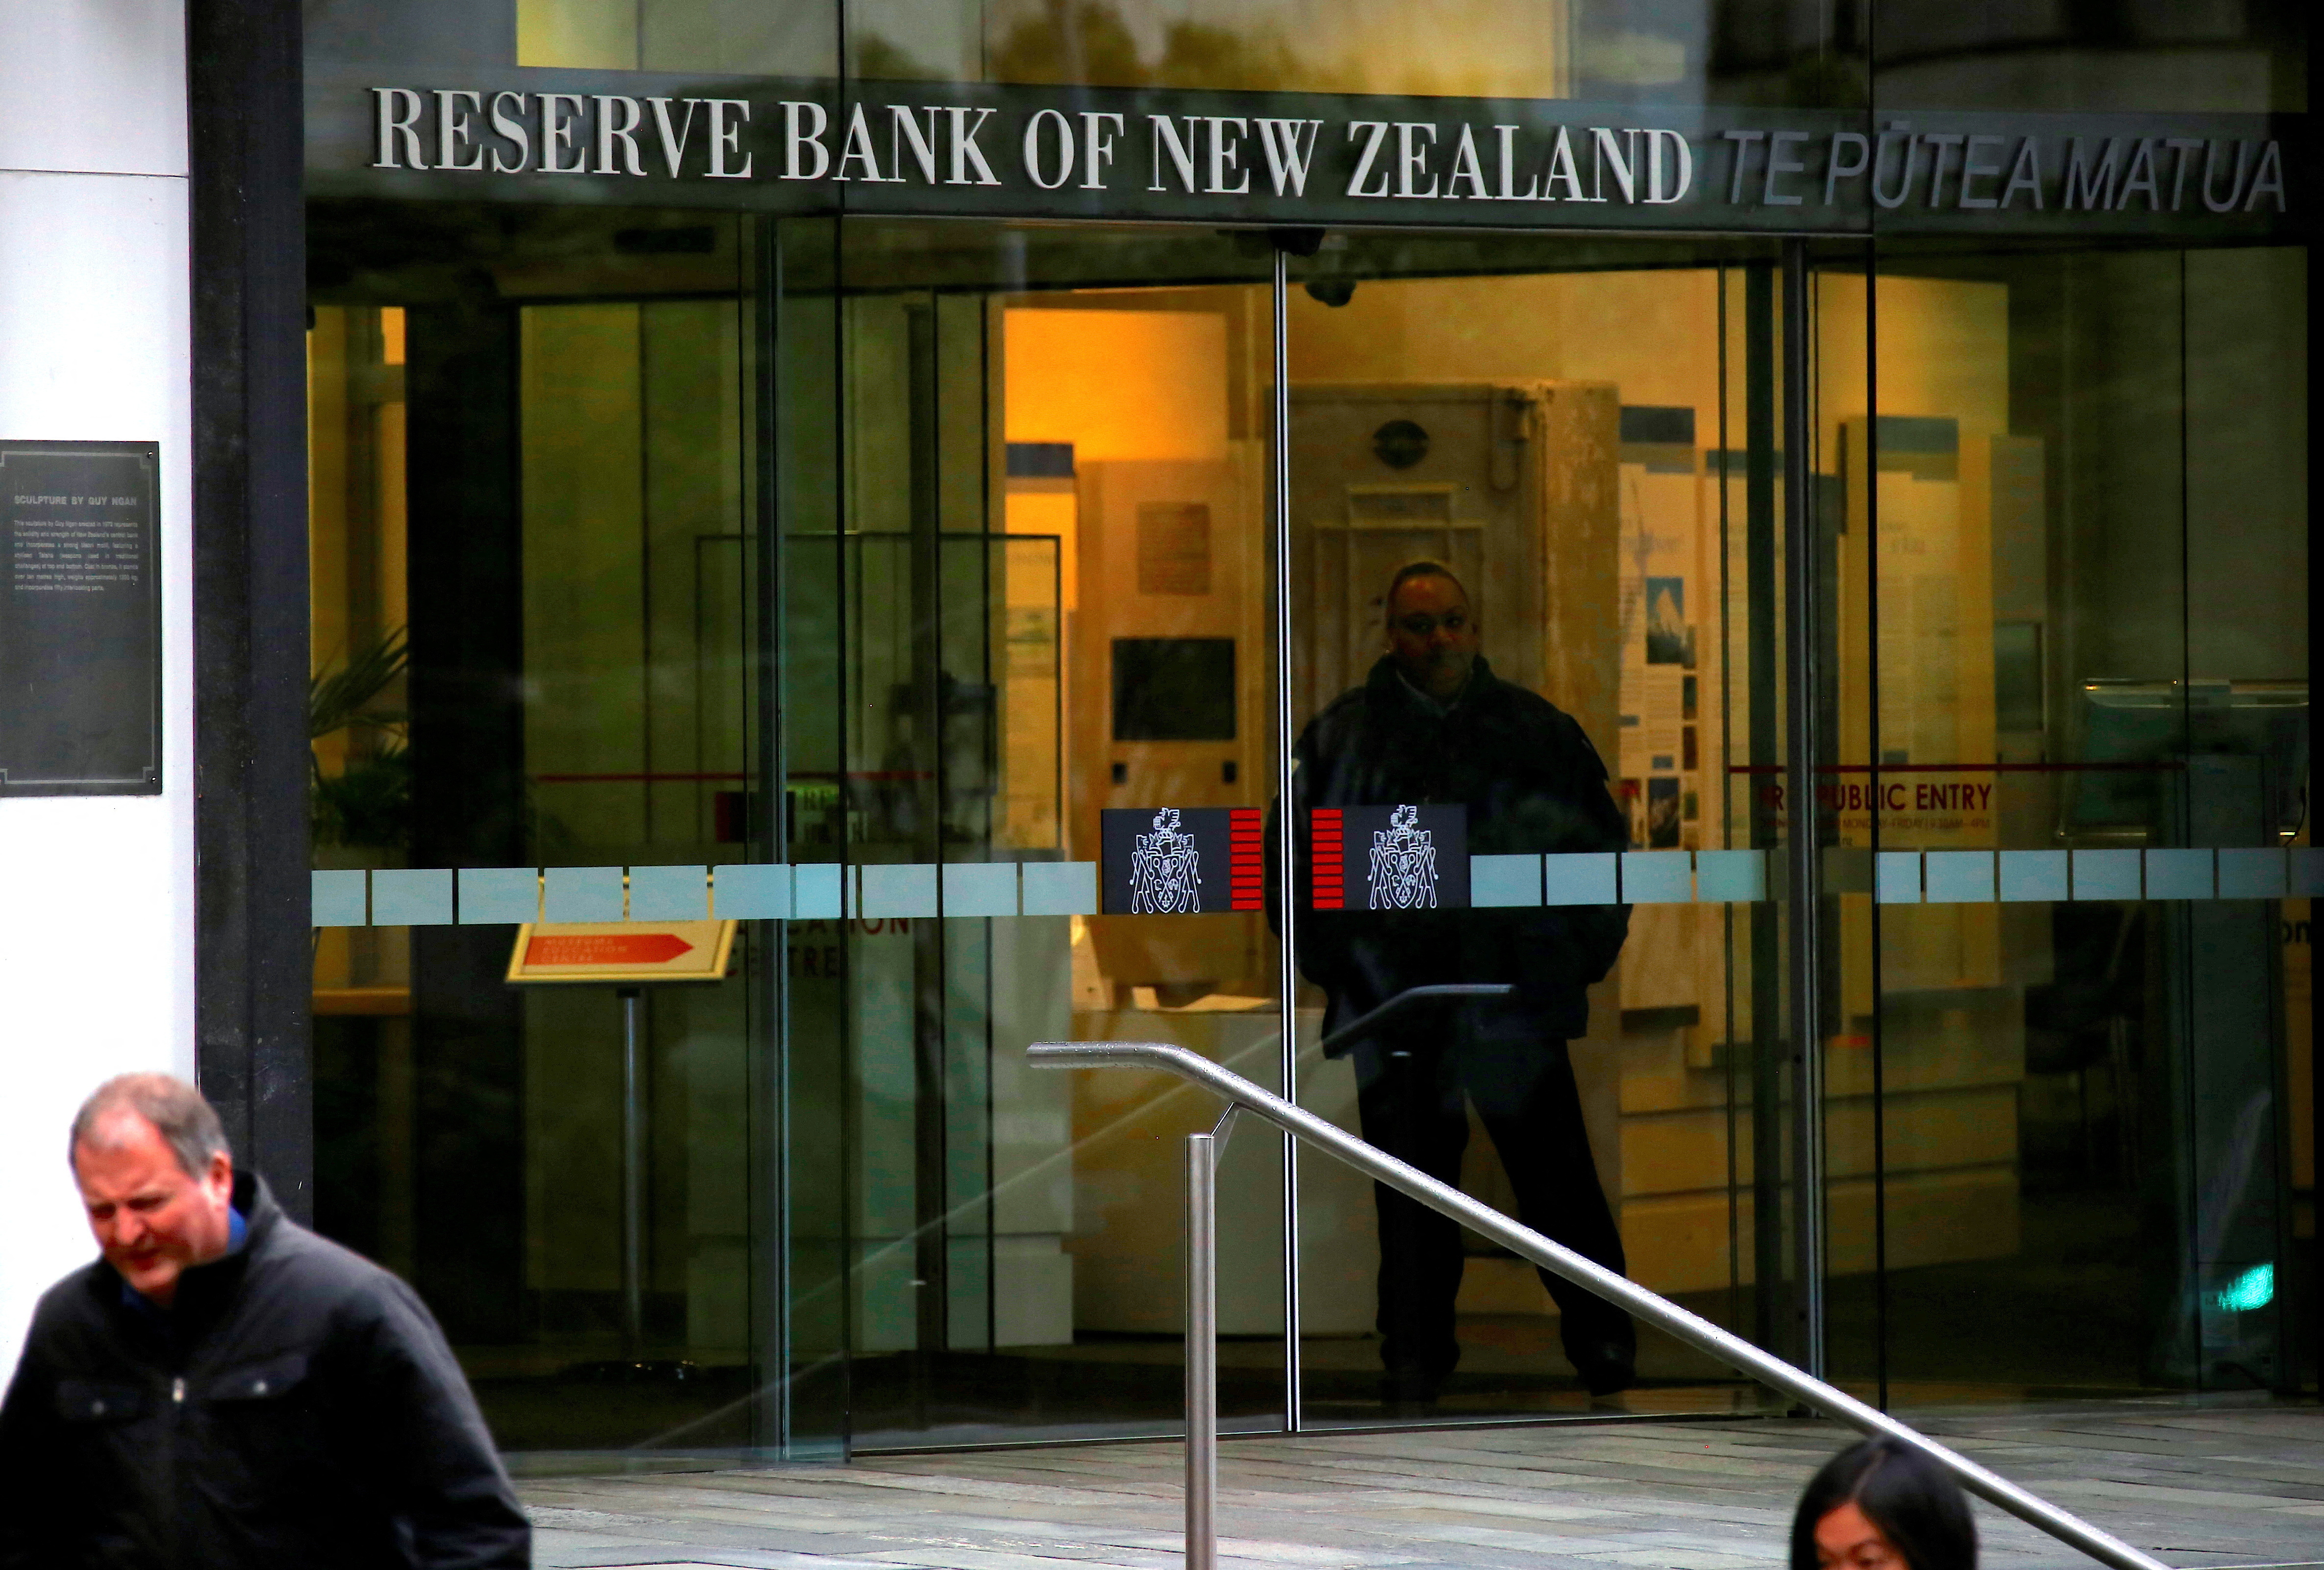 Pedestrians walk past as a security guard stands in the main entrance to the Reserve Bank of New Zealand located in central Wellington, New Zealand